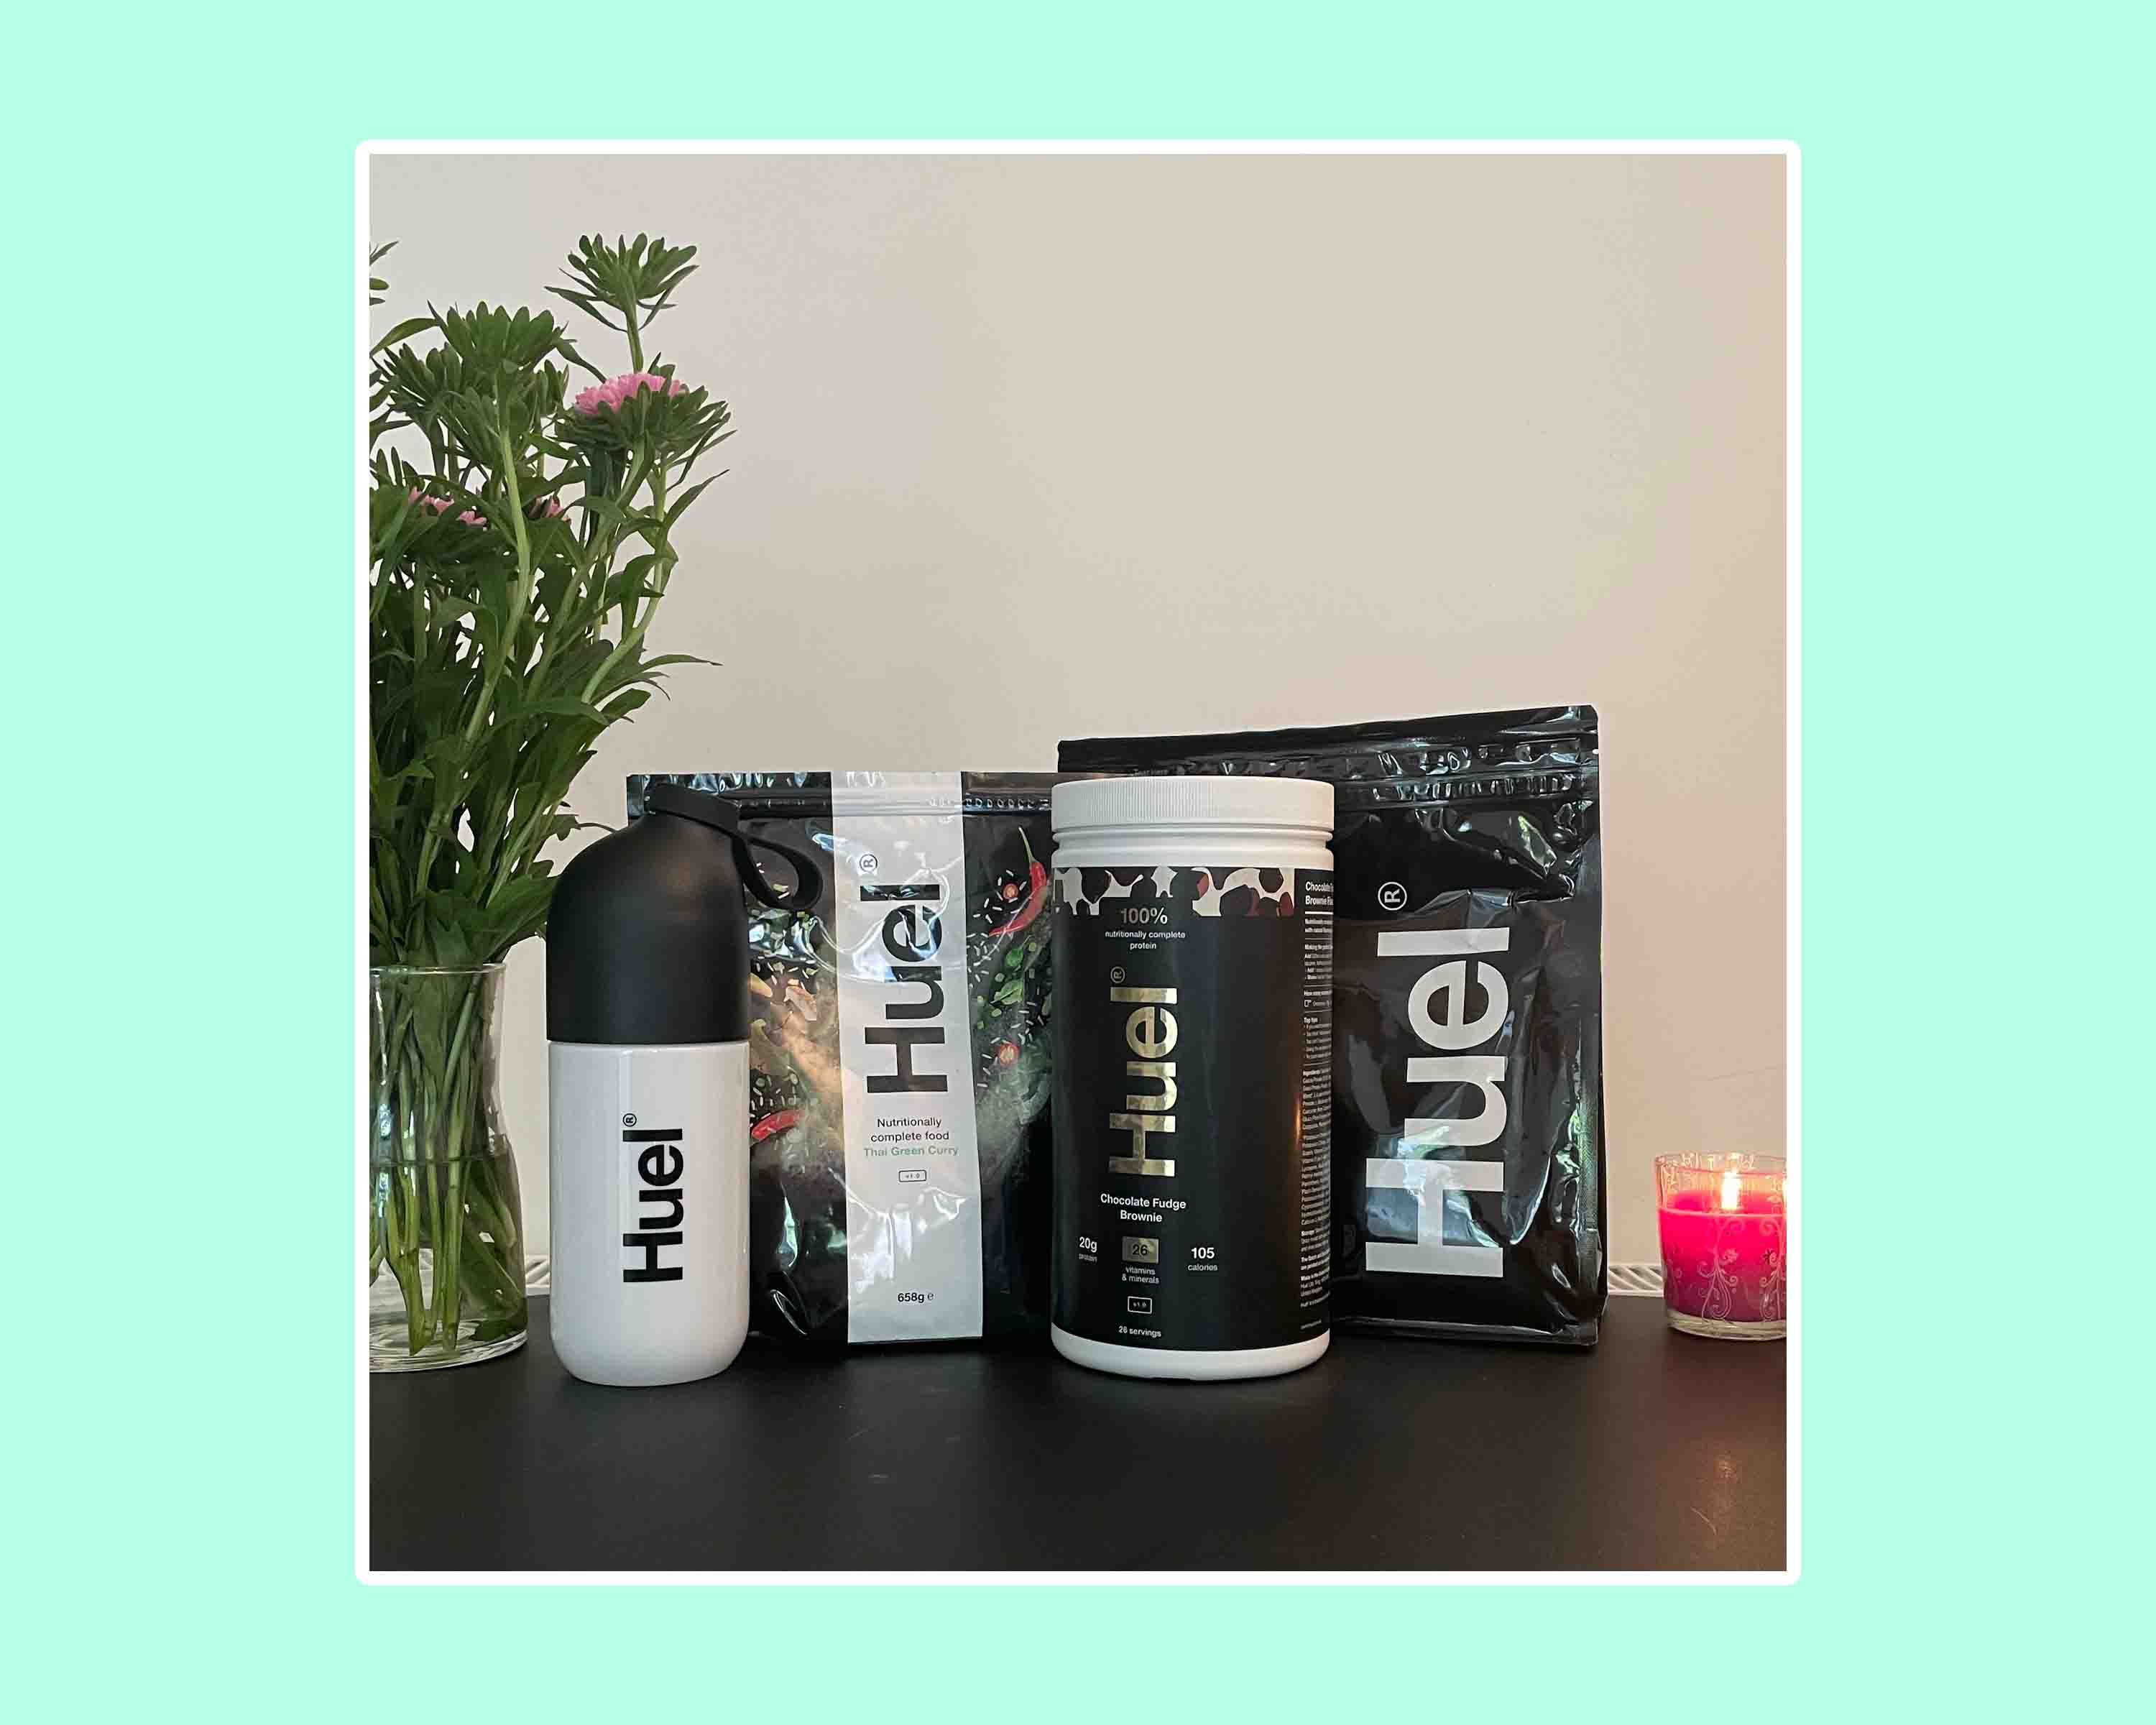 Huel Black Edition | Chocolate 40g Vegan Protein Powder | Nutritionally  Complete Meal | 27 Vitamins and Minerals, Gluten Free | 17 Servings | Scoop